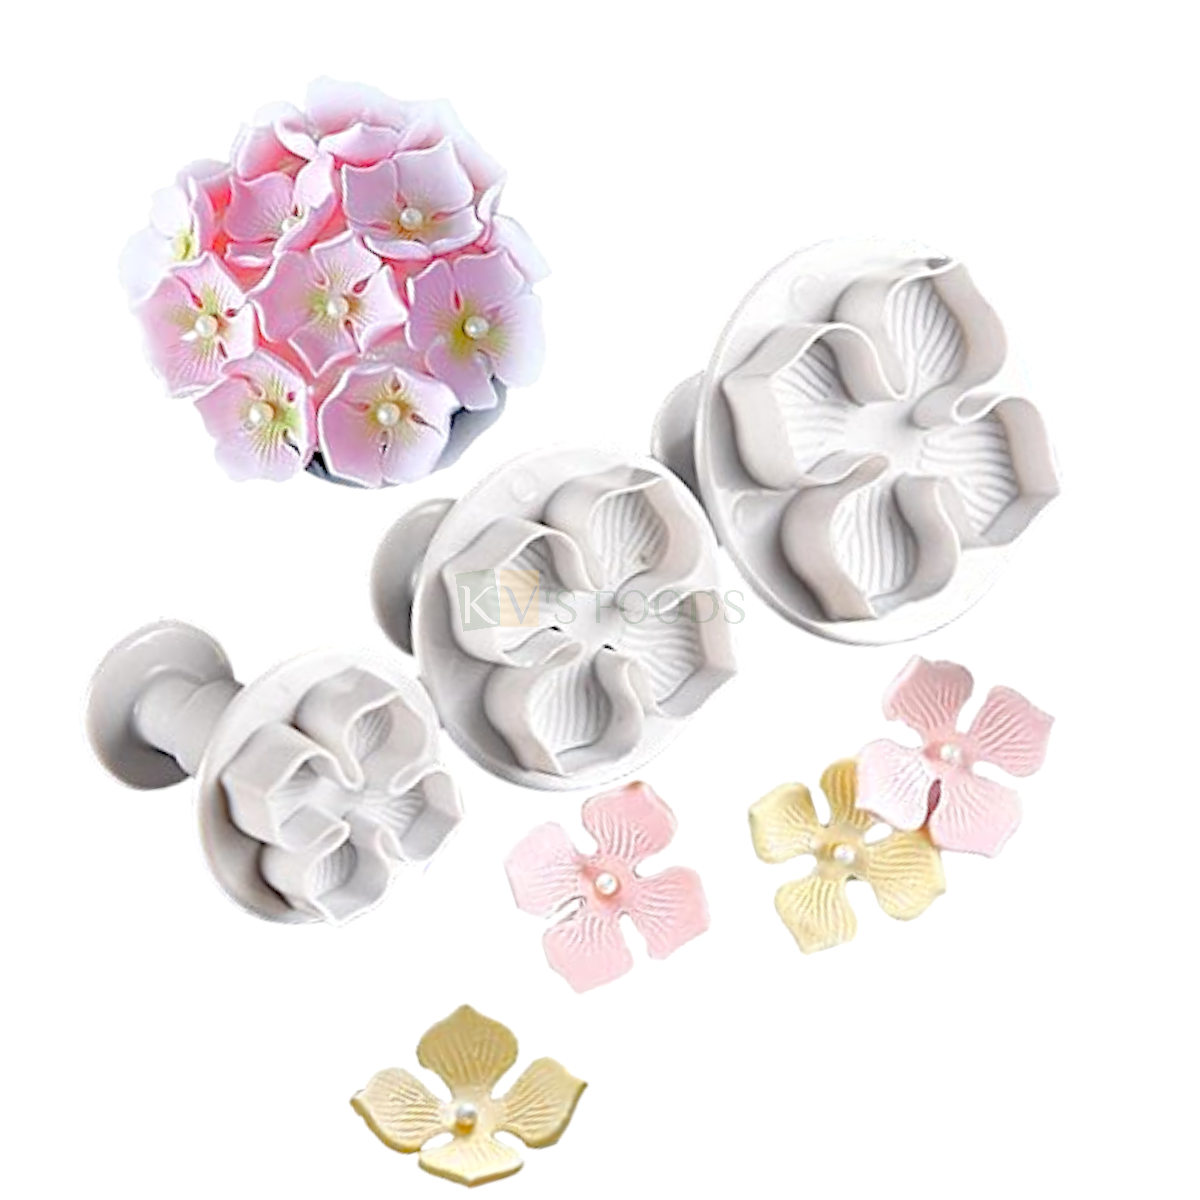 3 PCS White Hydrangea Laurustinus Flower Fondant Plunger Cutters Stamps, Molds, Embossing Spring Mold Printed Presses Impression Chocolates Pancake Cookies Wedding Anniversary Cakes Cupcake Decoration